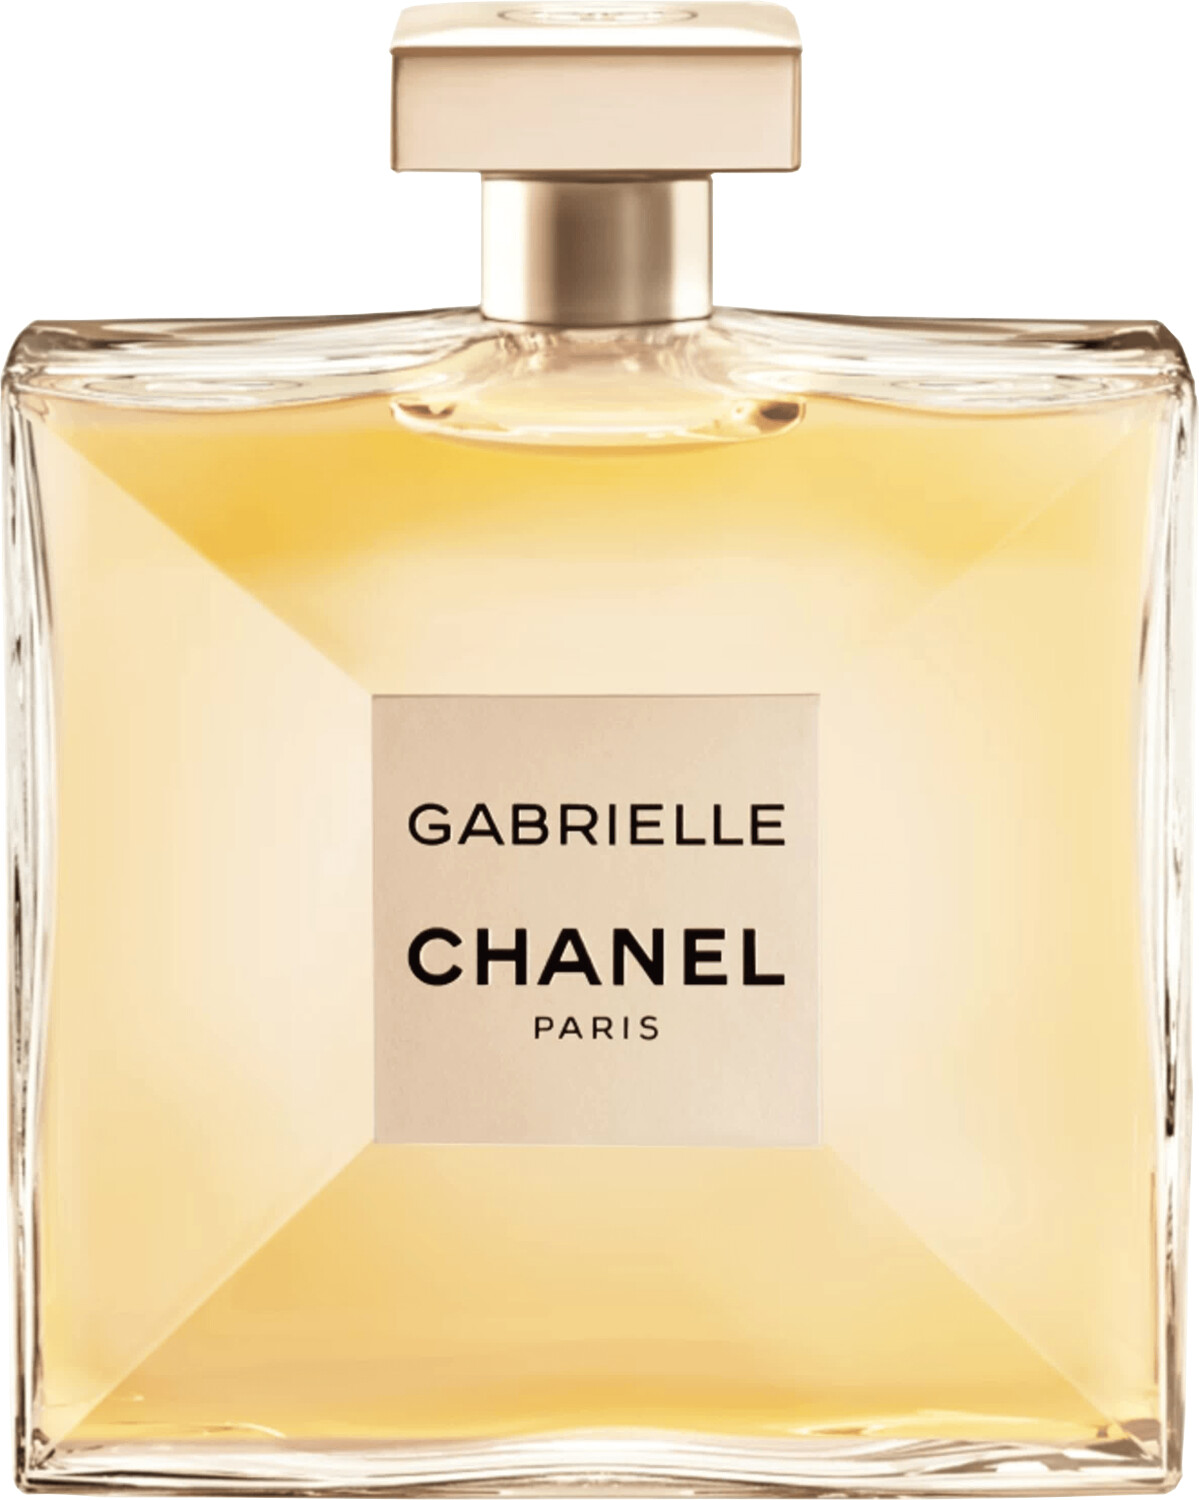 gabrielle chanel and coco chanel perfume